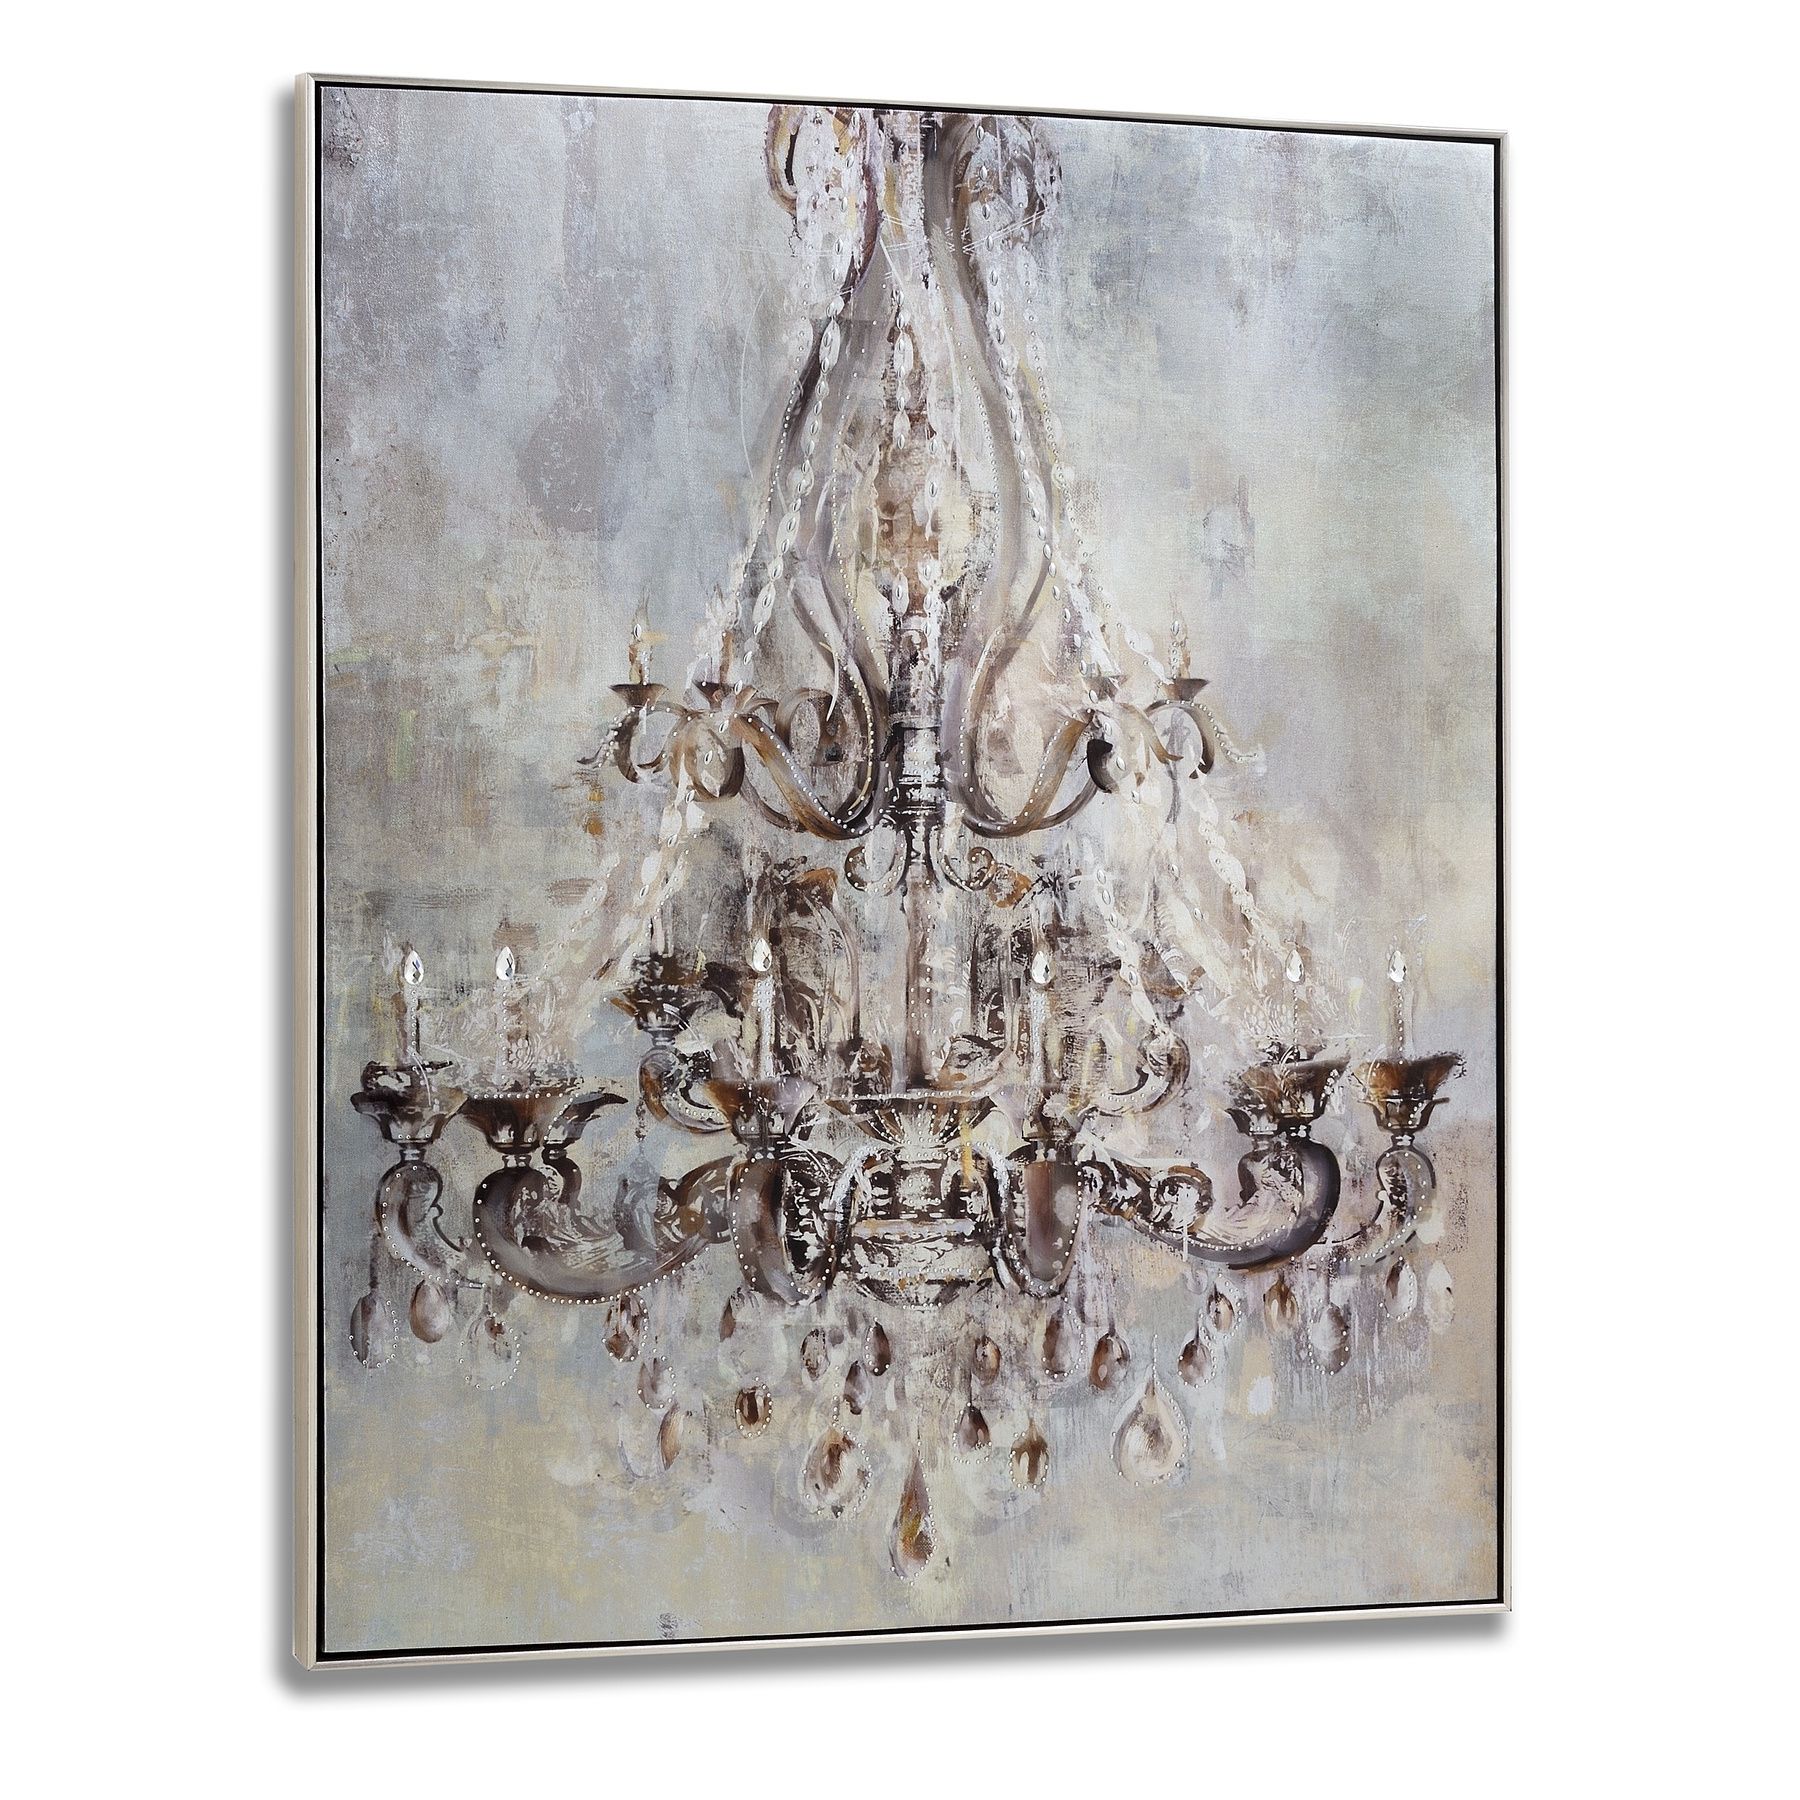 Framed Metalic Chandelier Wall Art With Diamantes (View 1 of 20)